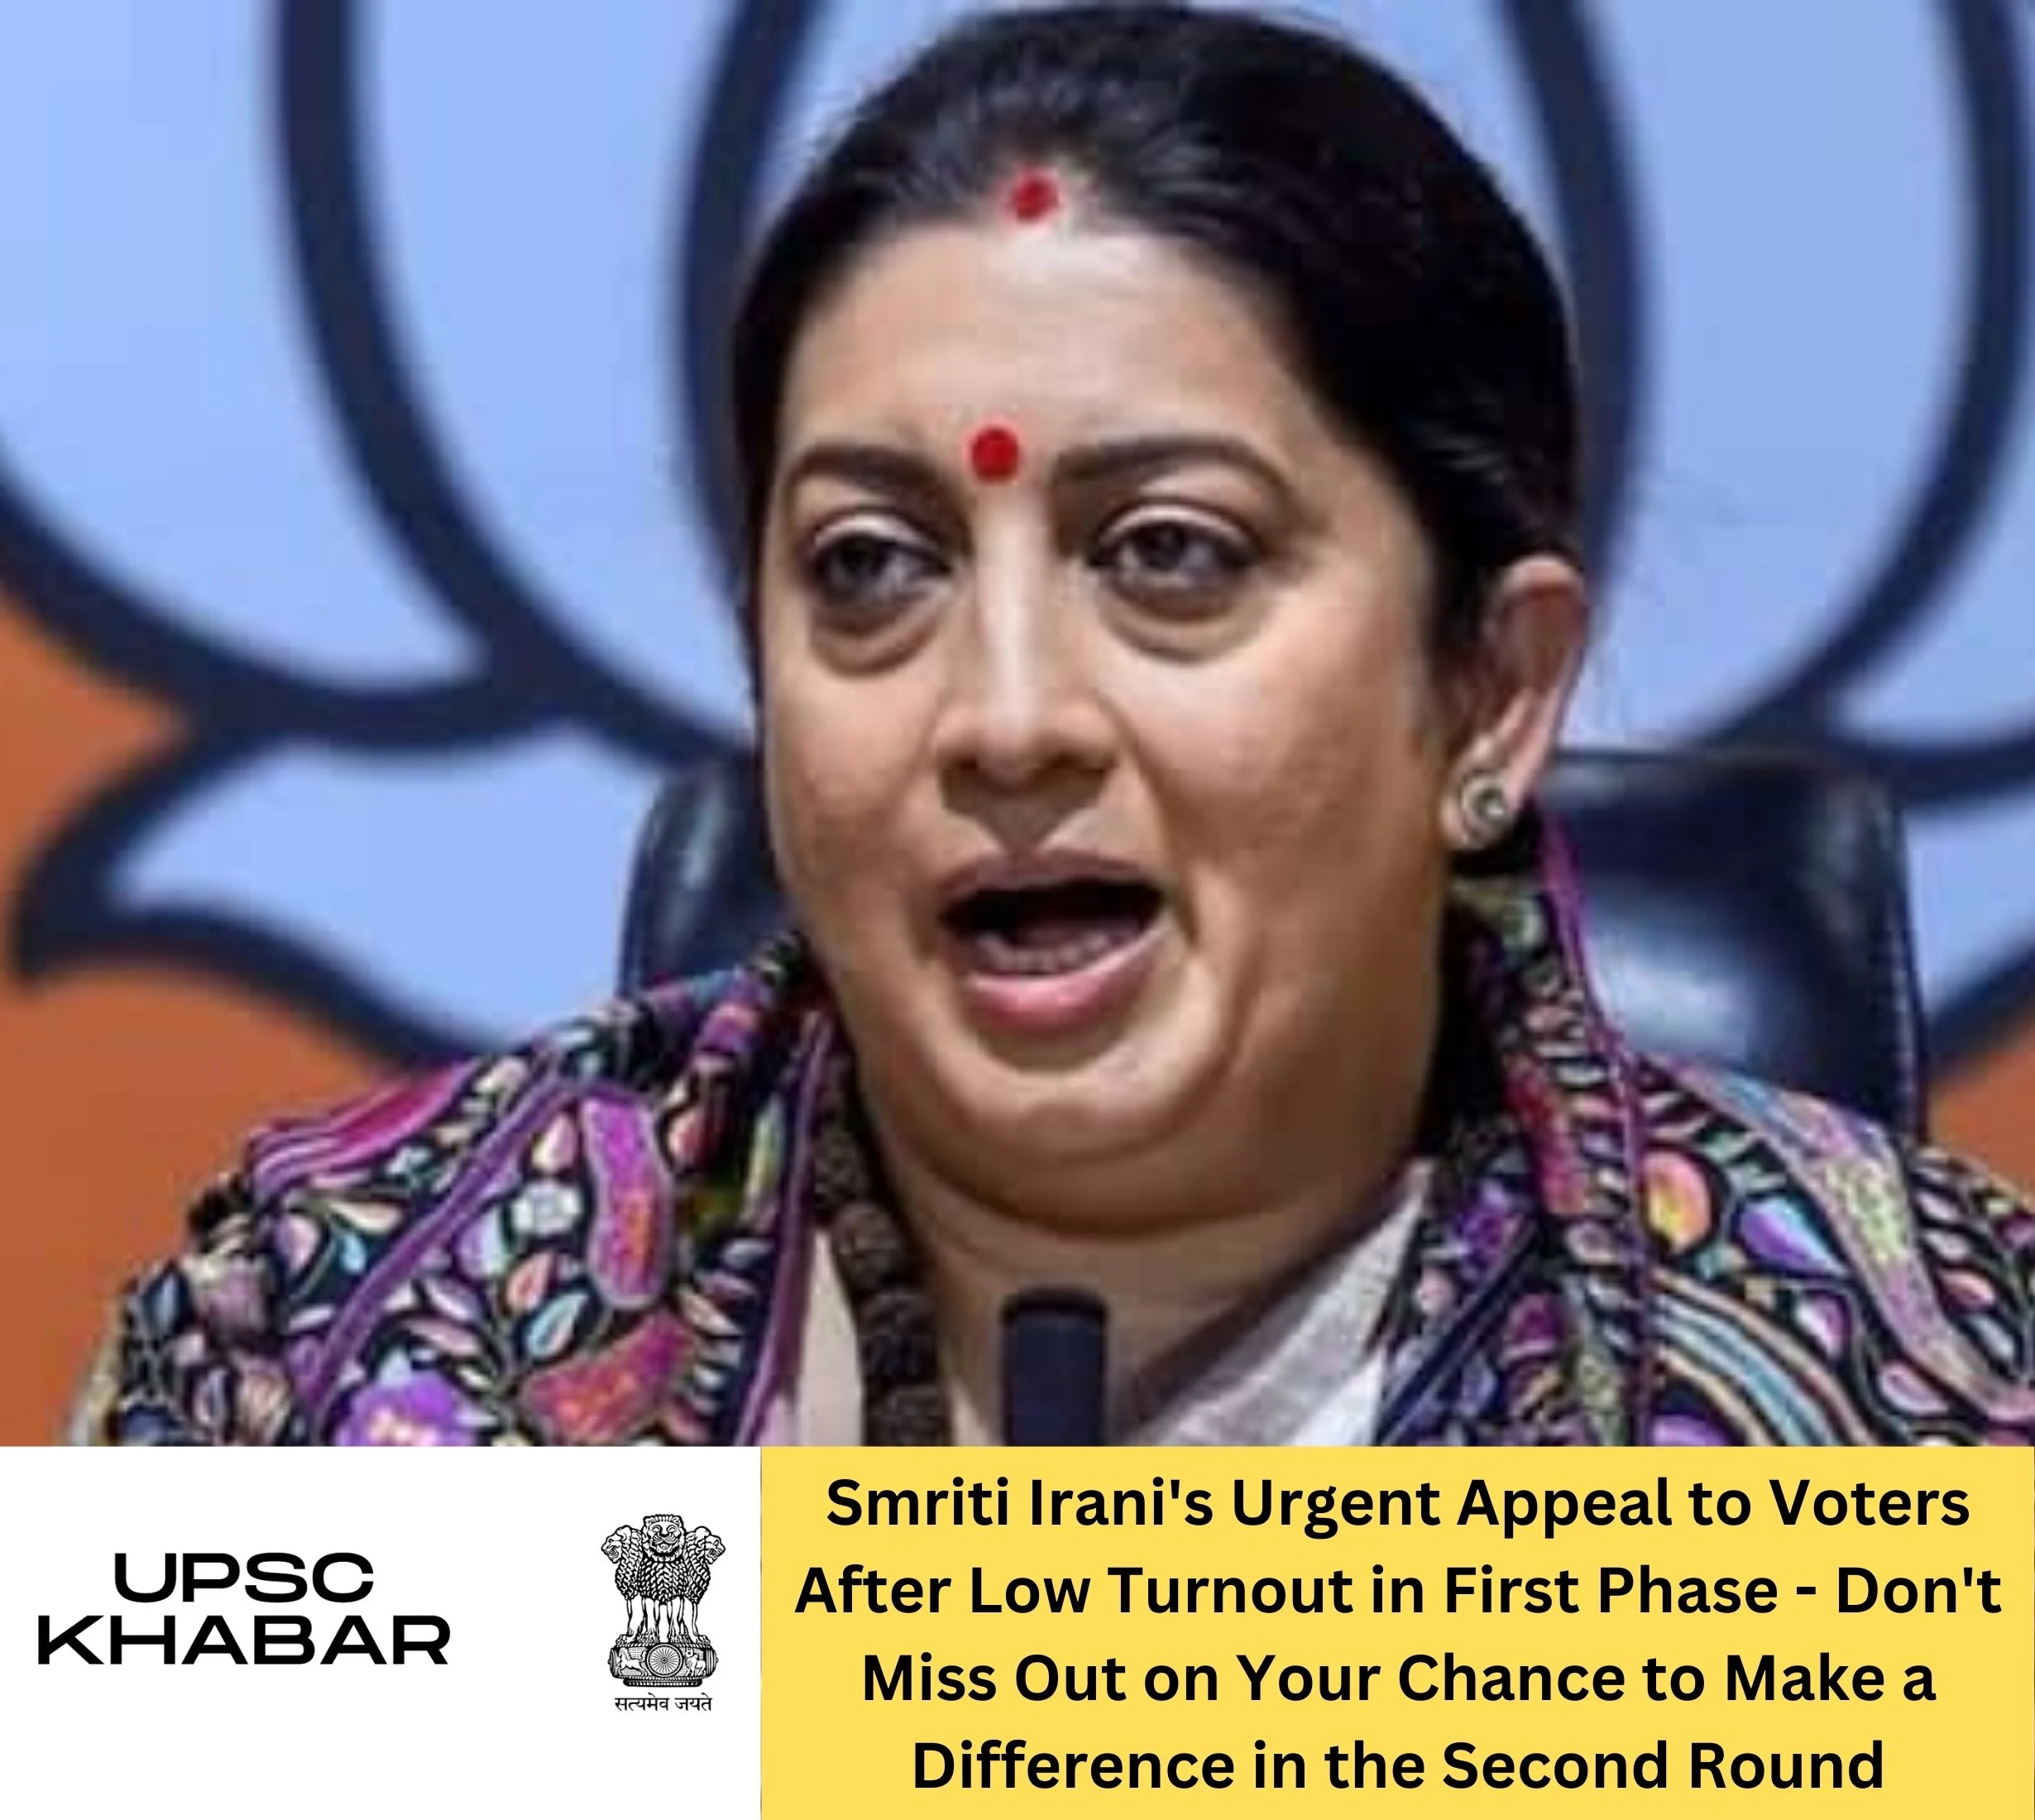 Smriti Irani's Urgent Appeal to Voters After Low Turnout in First Phase - Don't Miss Out on Your Chance to Make a Difference in the Second Round